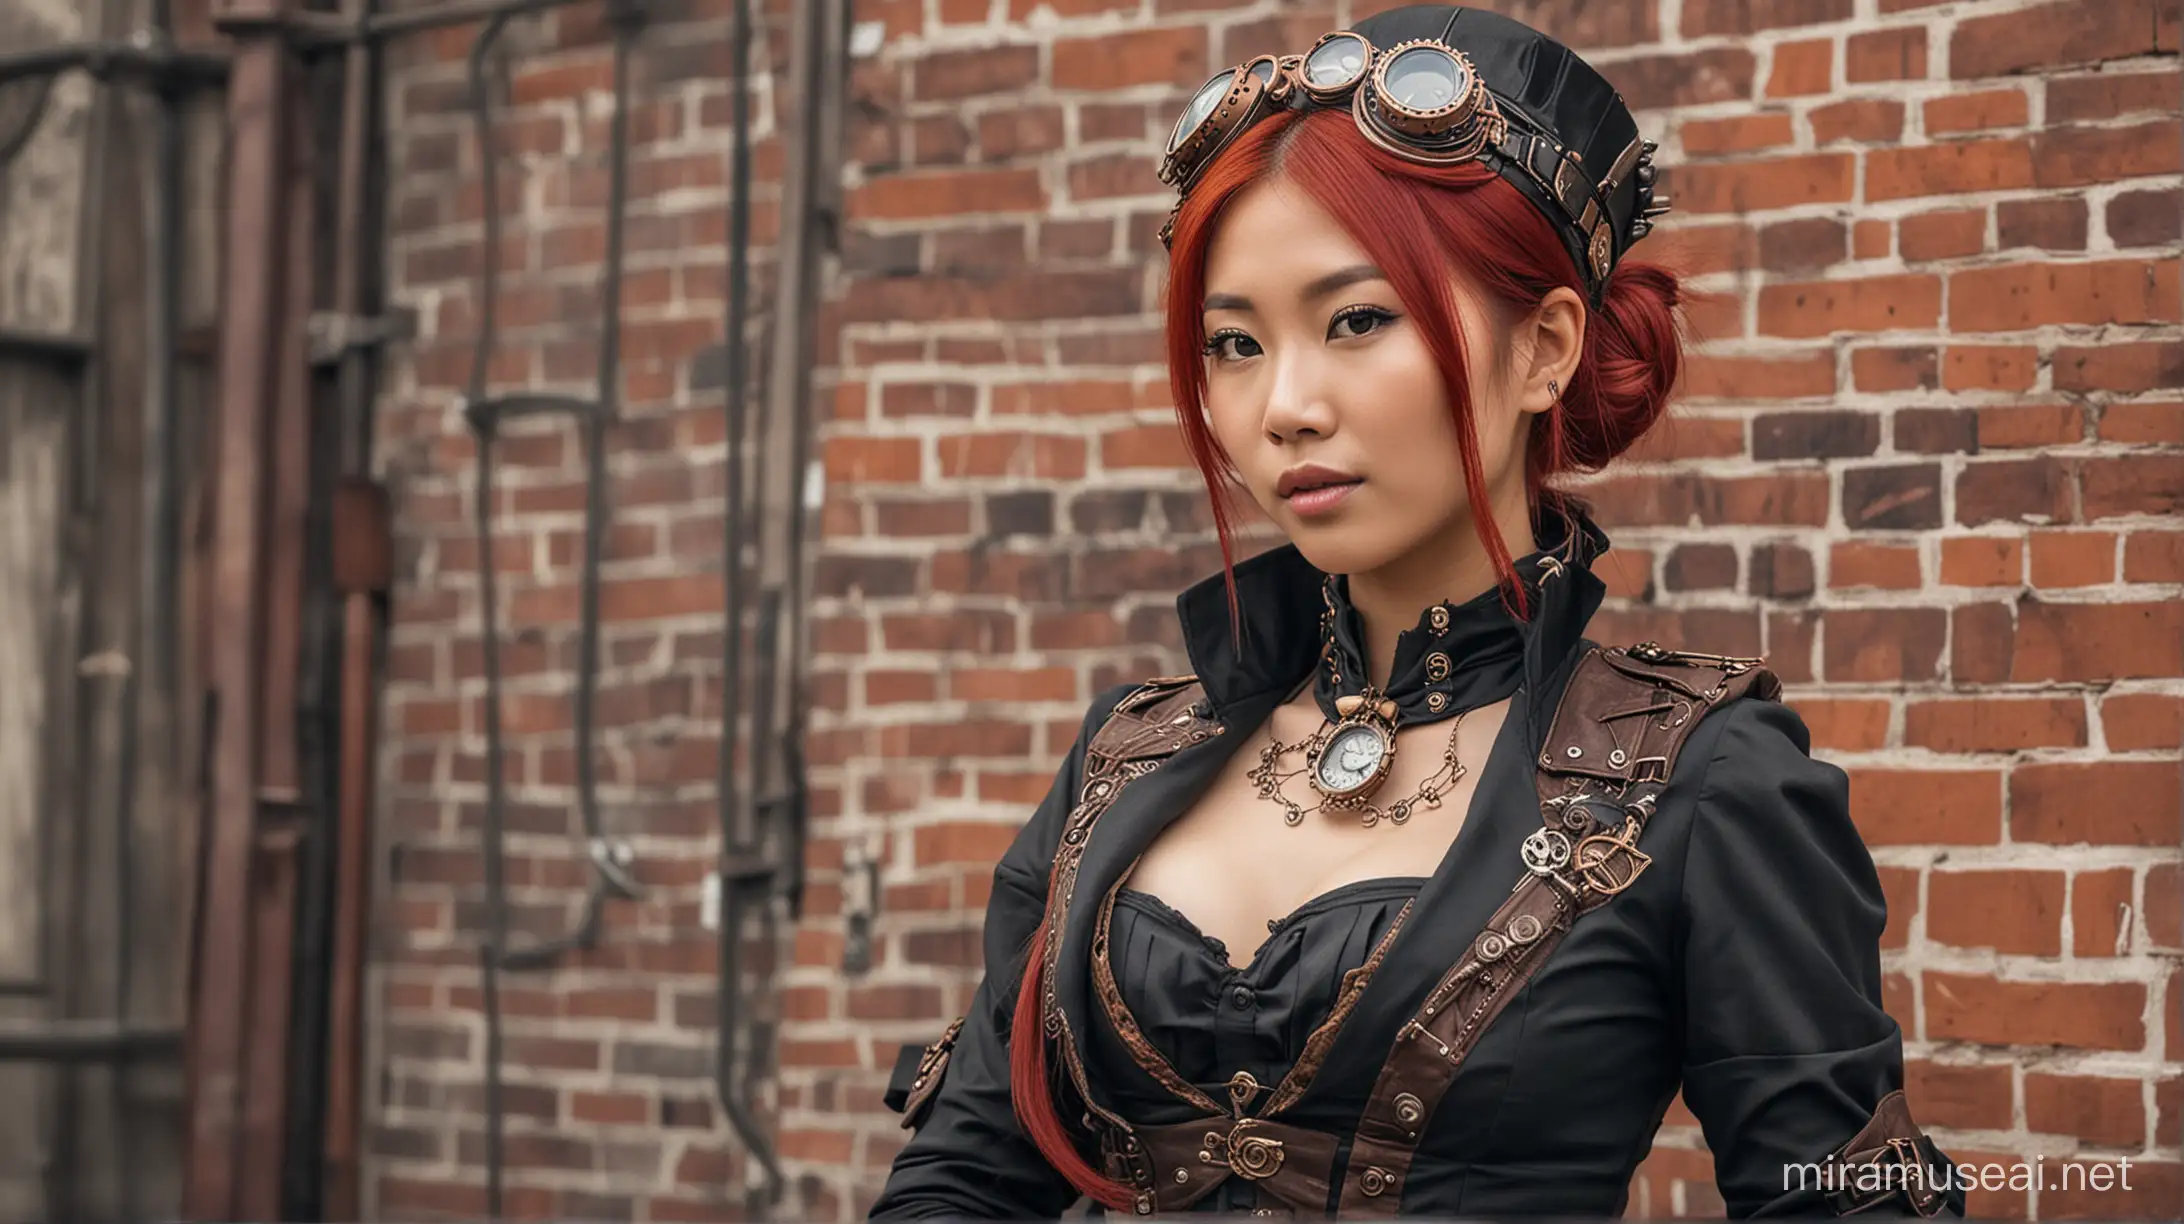 Asian woman with red hair wearing a steampunk outfiT